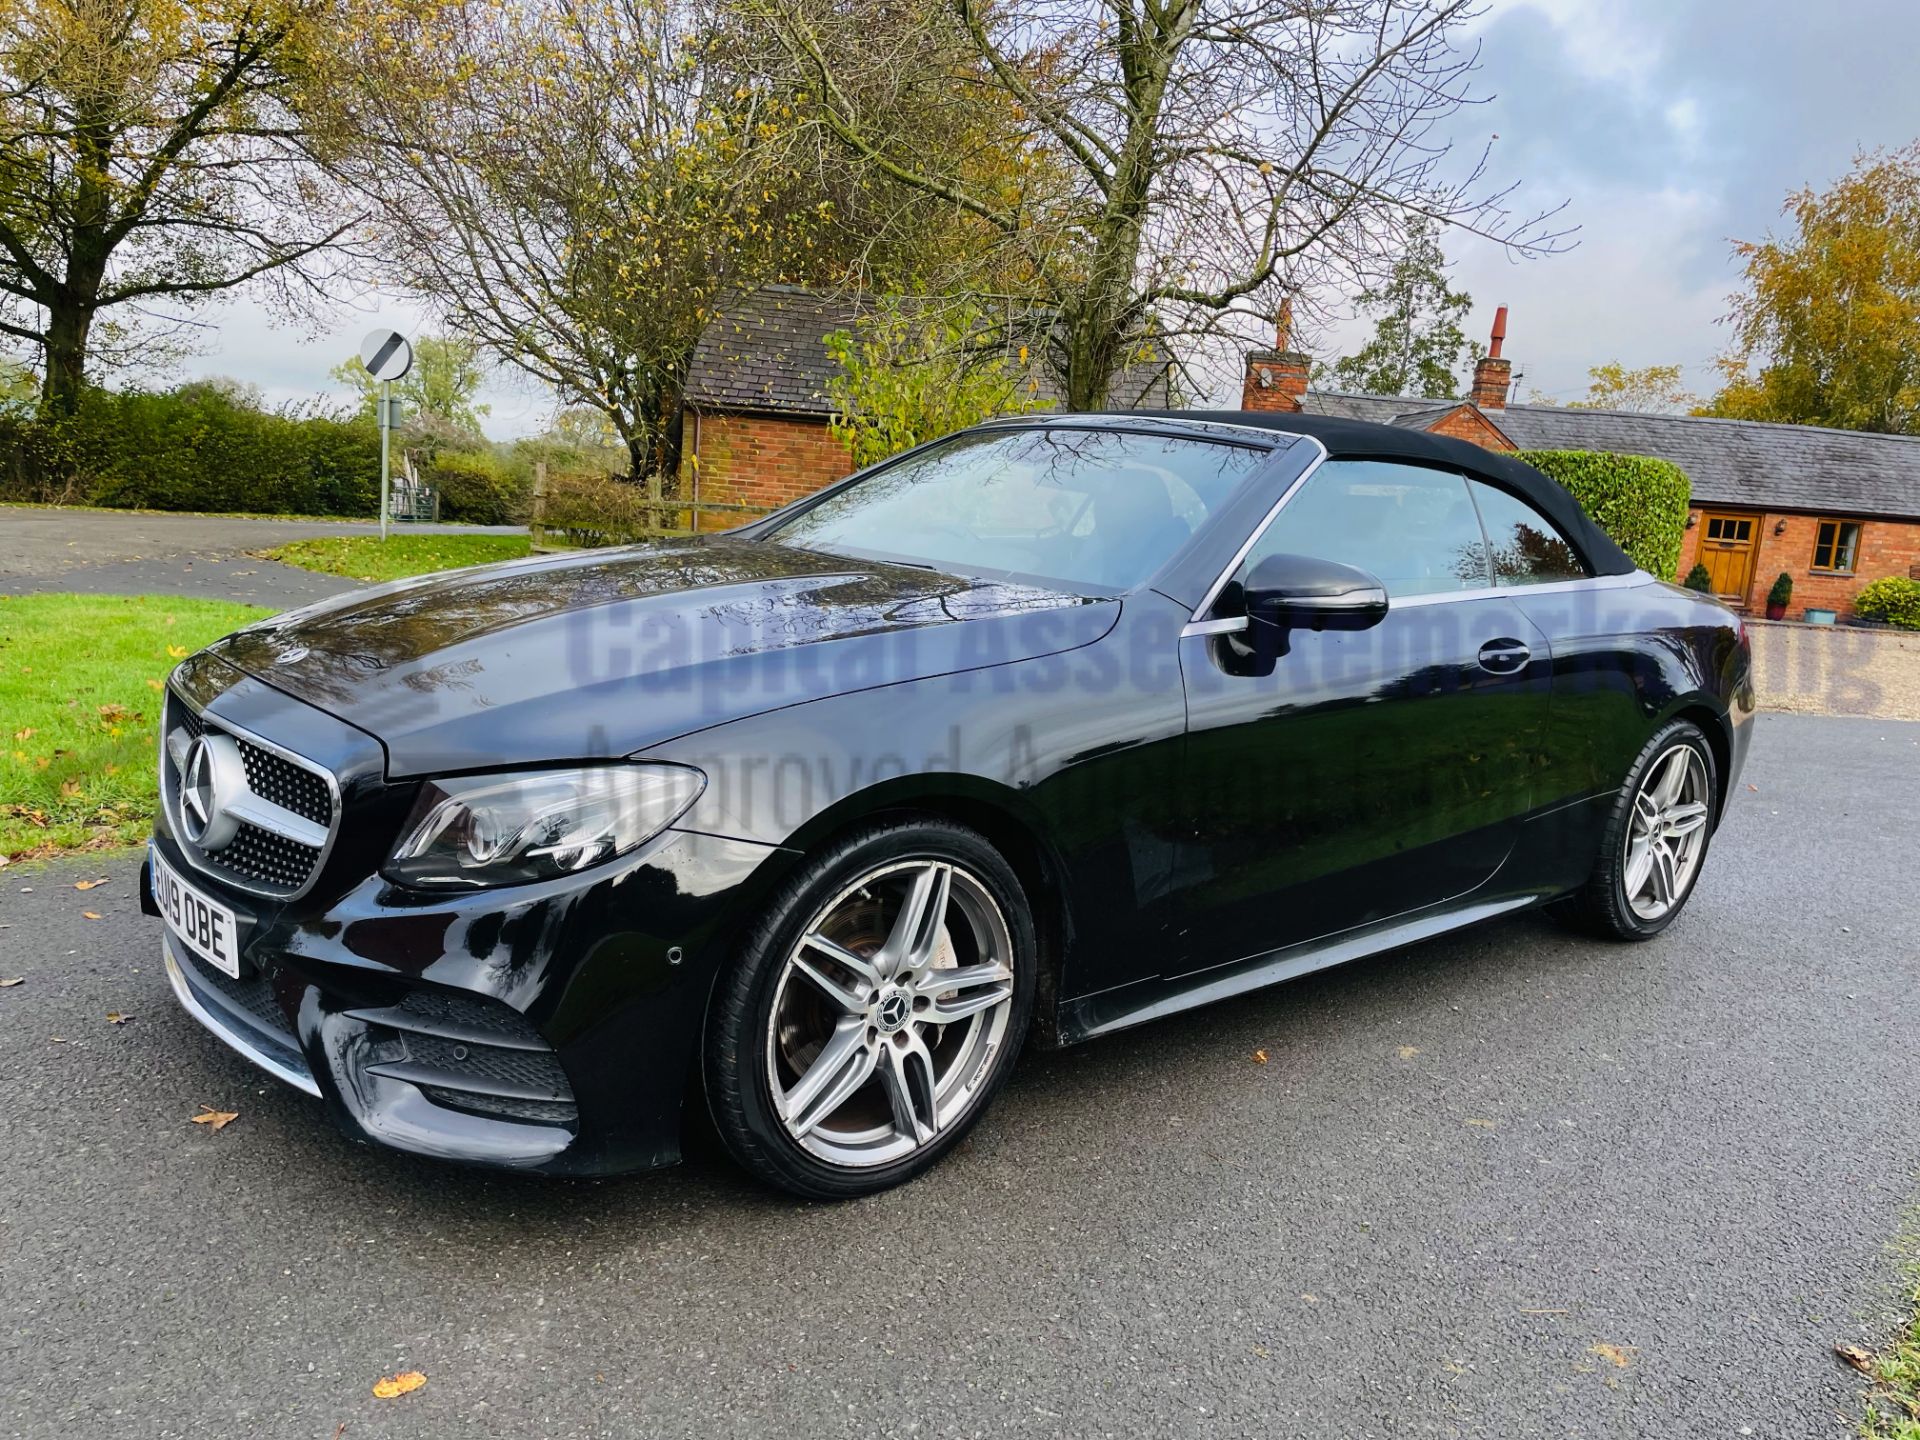 MERCEDES-BENZ E220D *AMG LINE - CABRIOLET* (2019 - EURO 6) '9G TRONIC AUTO - SAT NAV' *FULLY LOADED* - Image 12 of 66